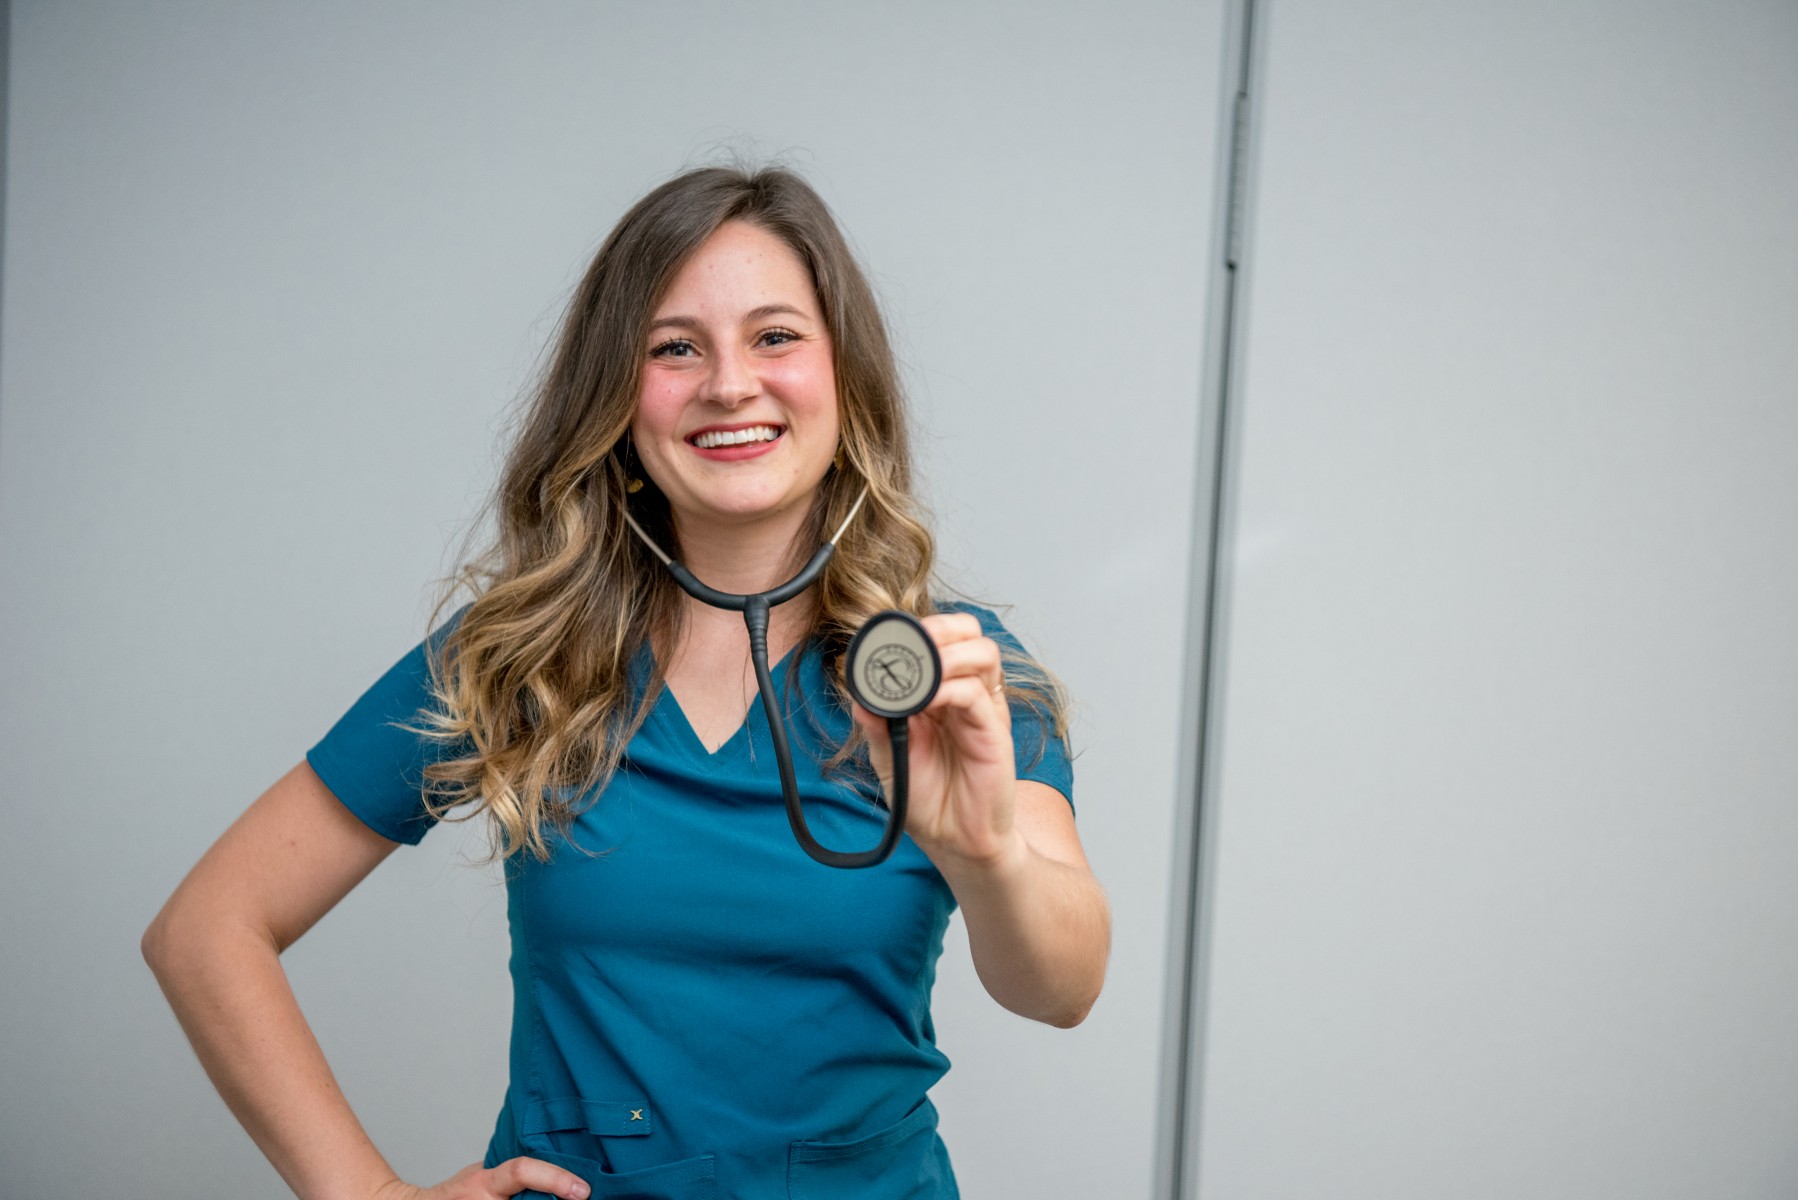 Nursing student Melody Henderson wears blue scrubs and smiles holding a stethoscope.